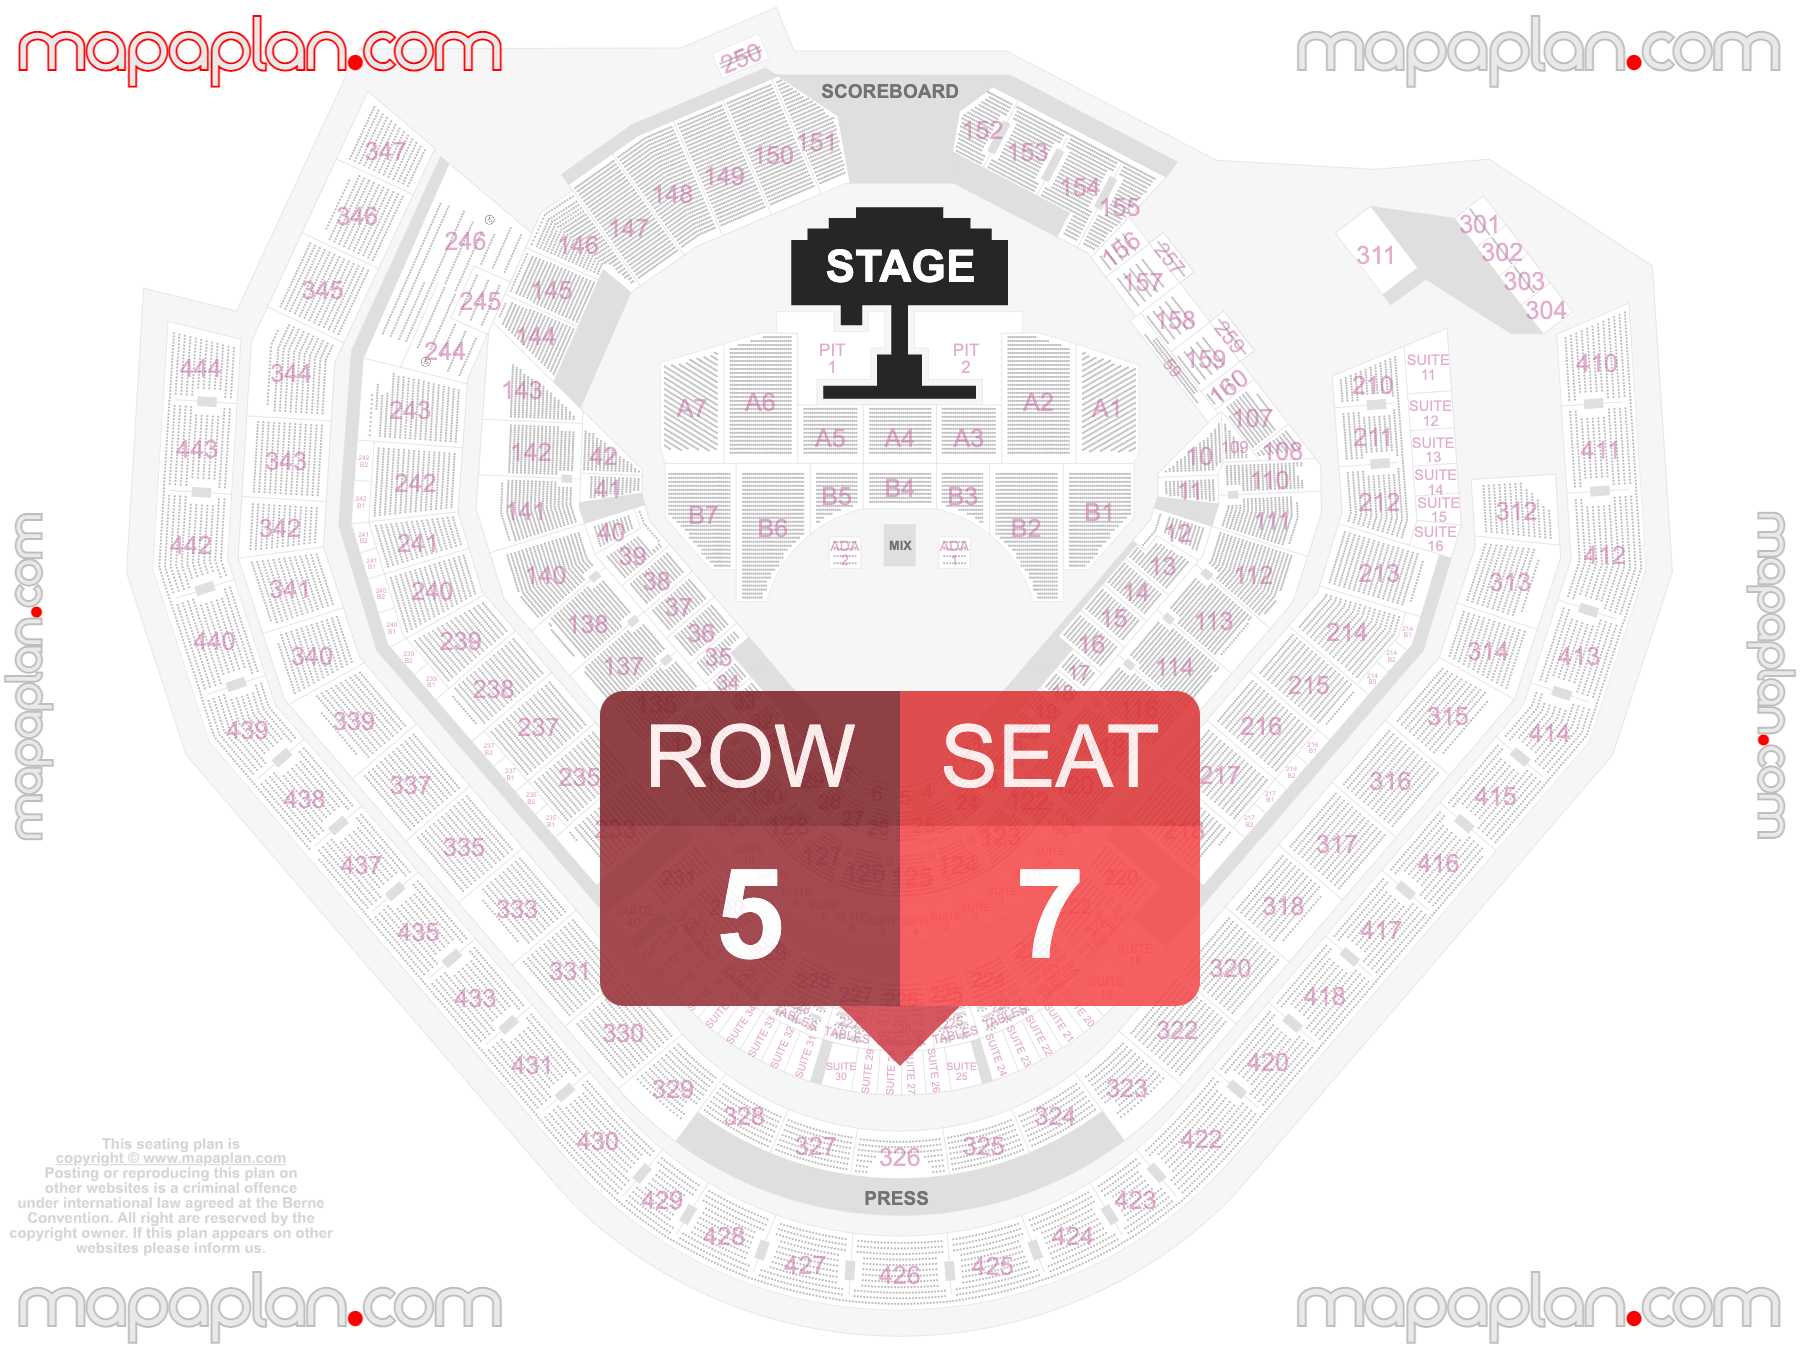 Atlanta Truist Park seating chart Concert with extended catwalk runway B-stage and floor PIT general admission standing room only seating chart with exact section numbers showing best rows and seats selection 3d layout - Best interactive seat finder tool with precise detailed location data